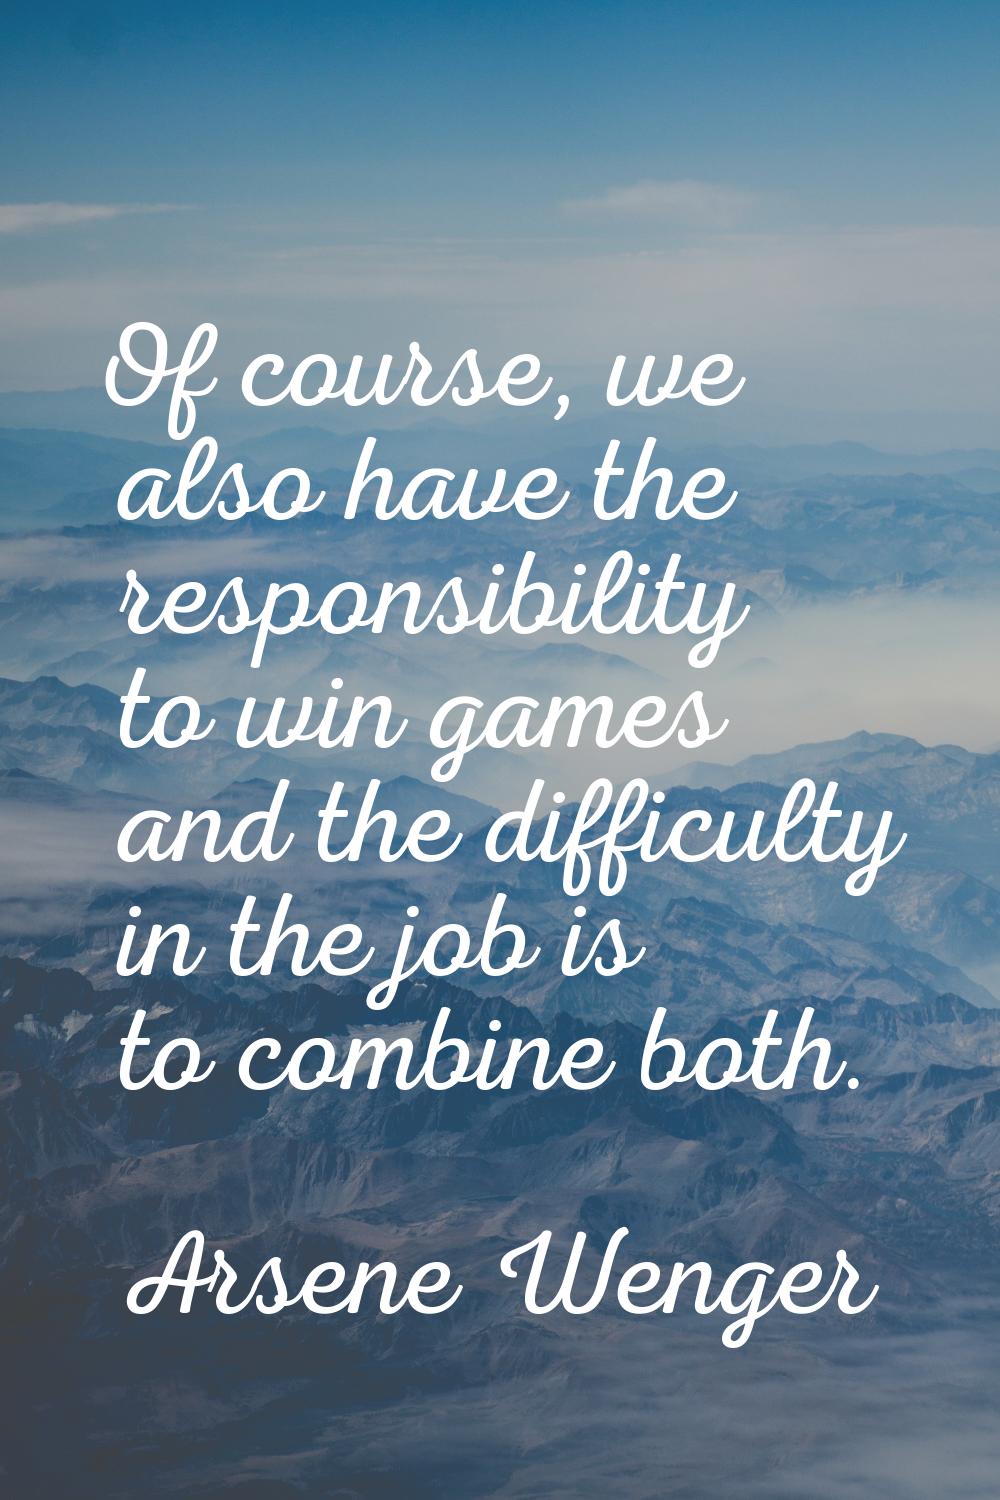 Of course, we also have the responsibility to win games and the difficulty in the job is to combine